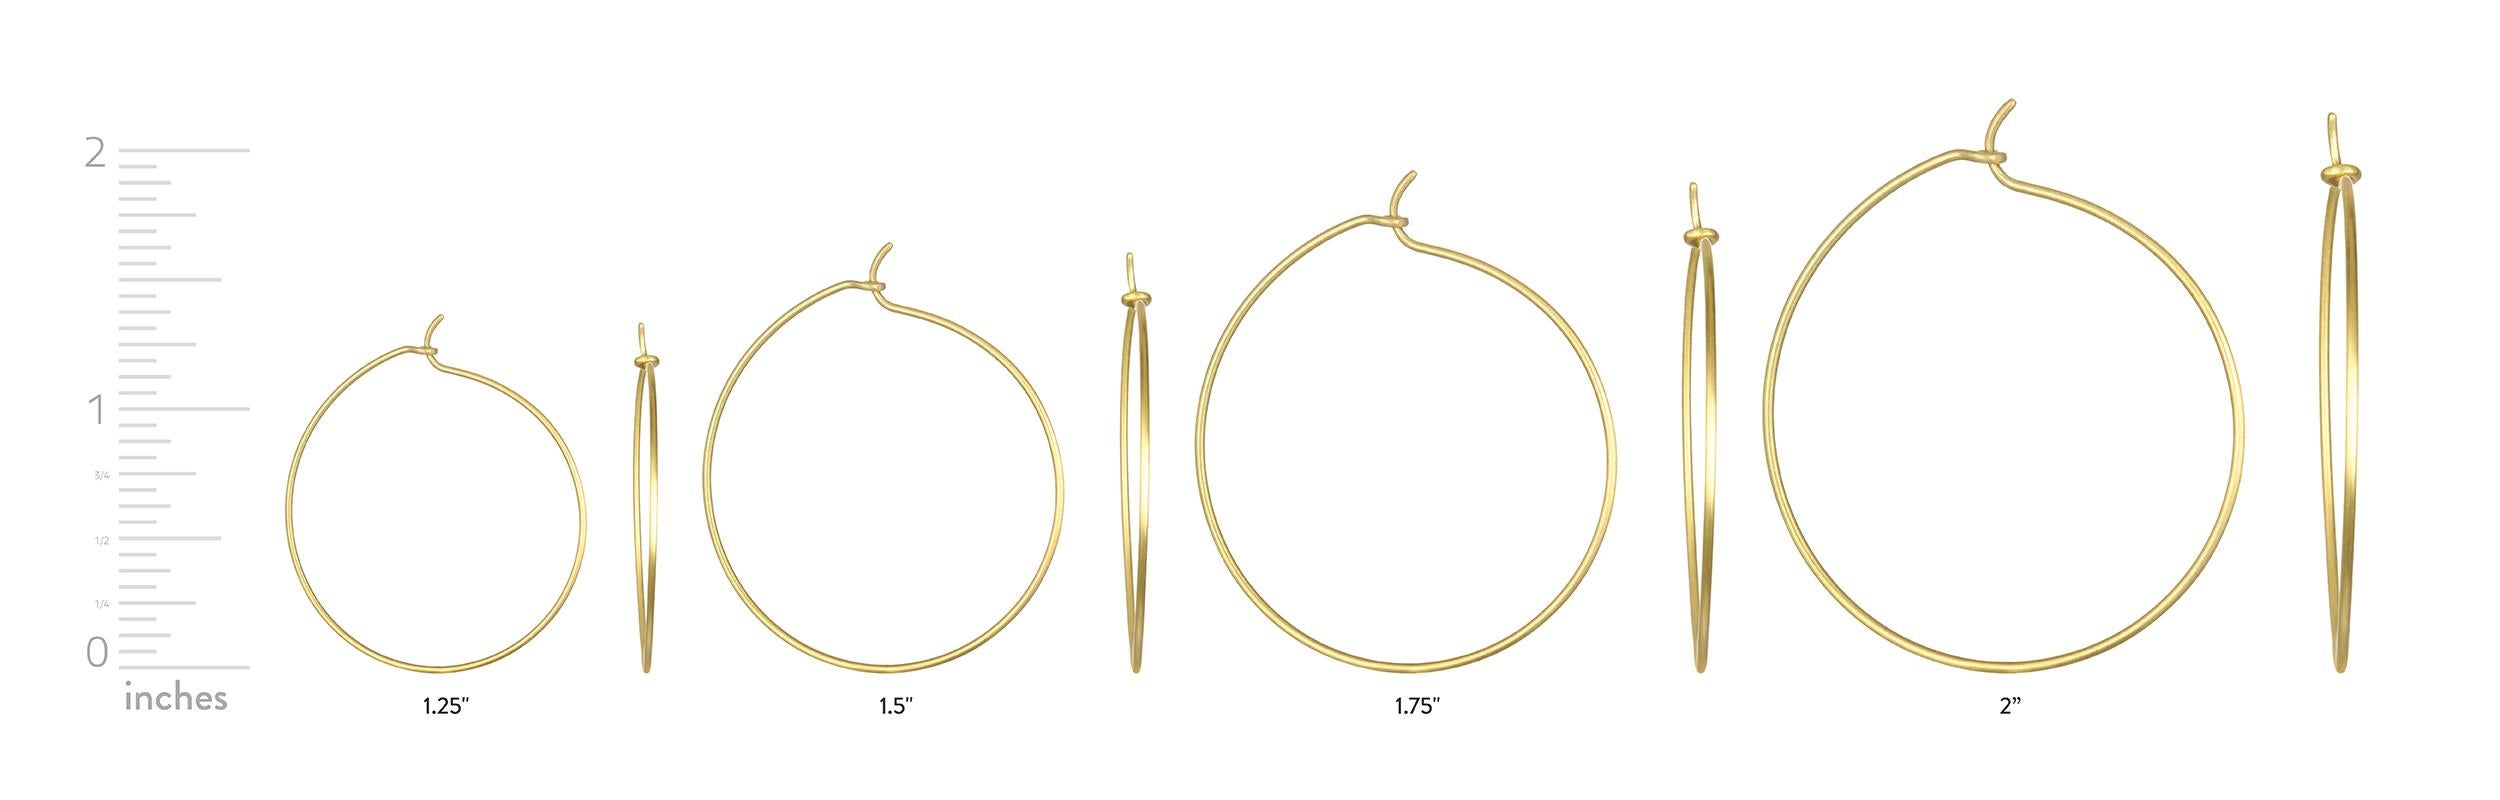 Faye Kim's 18 Karat Gold handmade wire hoops are a must-have for every jewelry wardrobe. Casual, chic and wearable every day, the hoops give endless opportunities to change your look with different drops, sold separately.

Hoops: 1.75